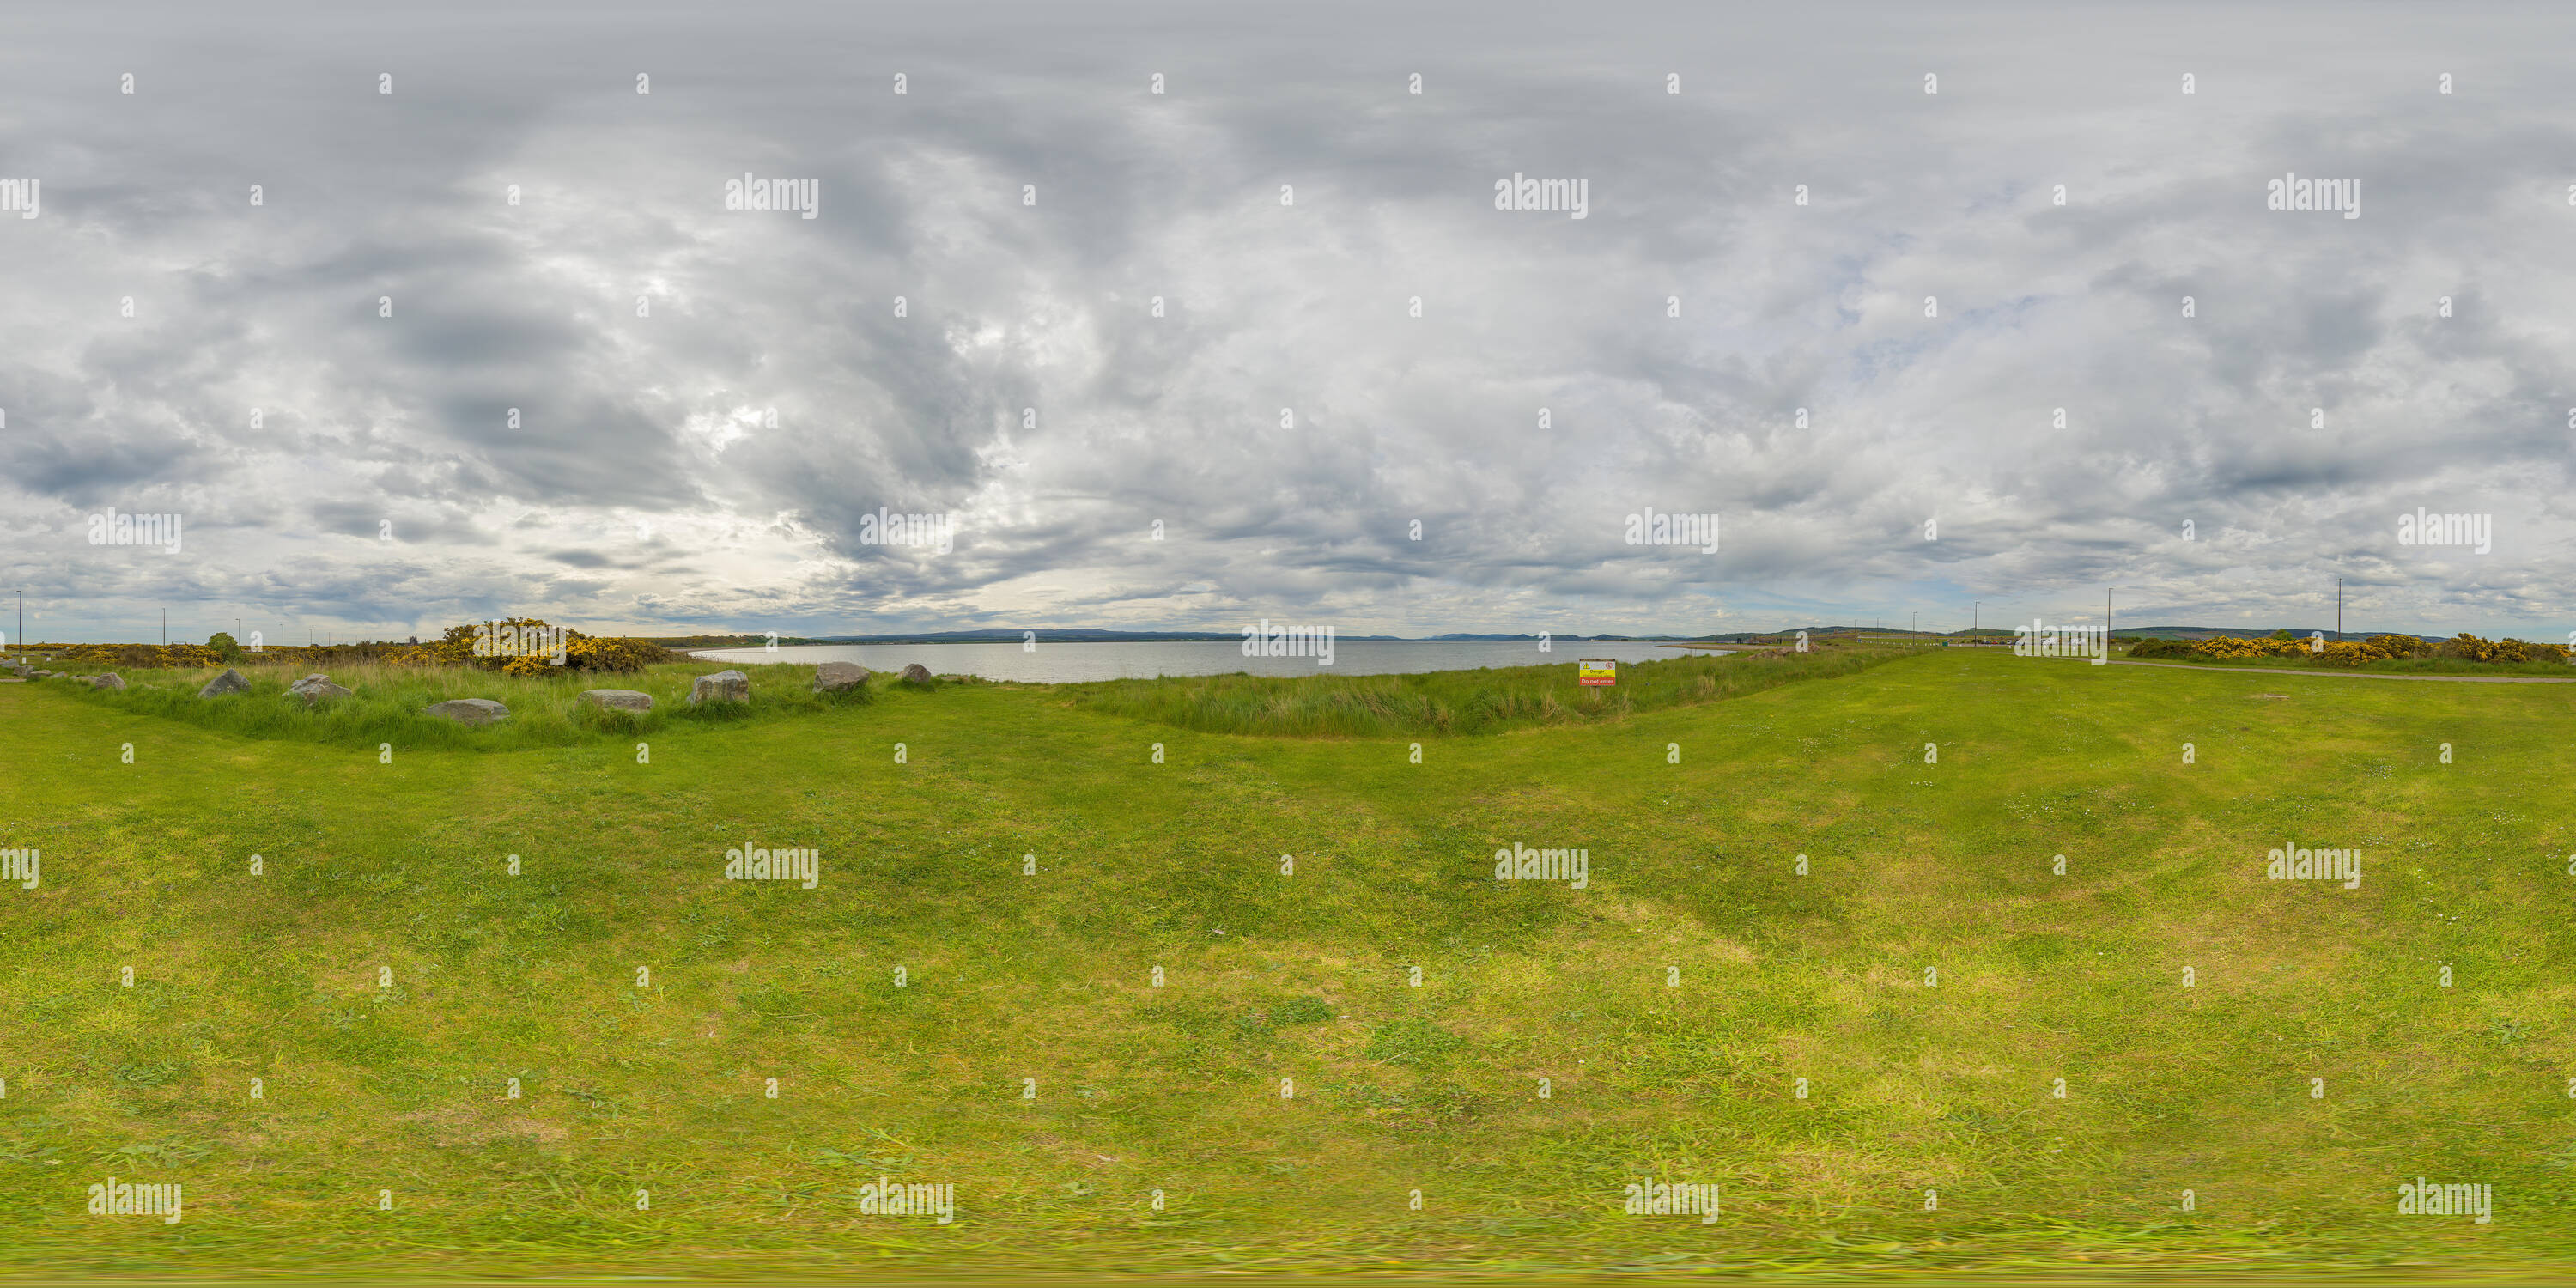 360 degree panoramic view of Grassland at the Fort George peninsula on the Moray Firth, opposite the lighthouse at Chanonry Point, guarding the entrance to Inverness, Scotland.